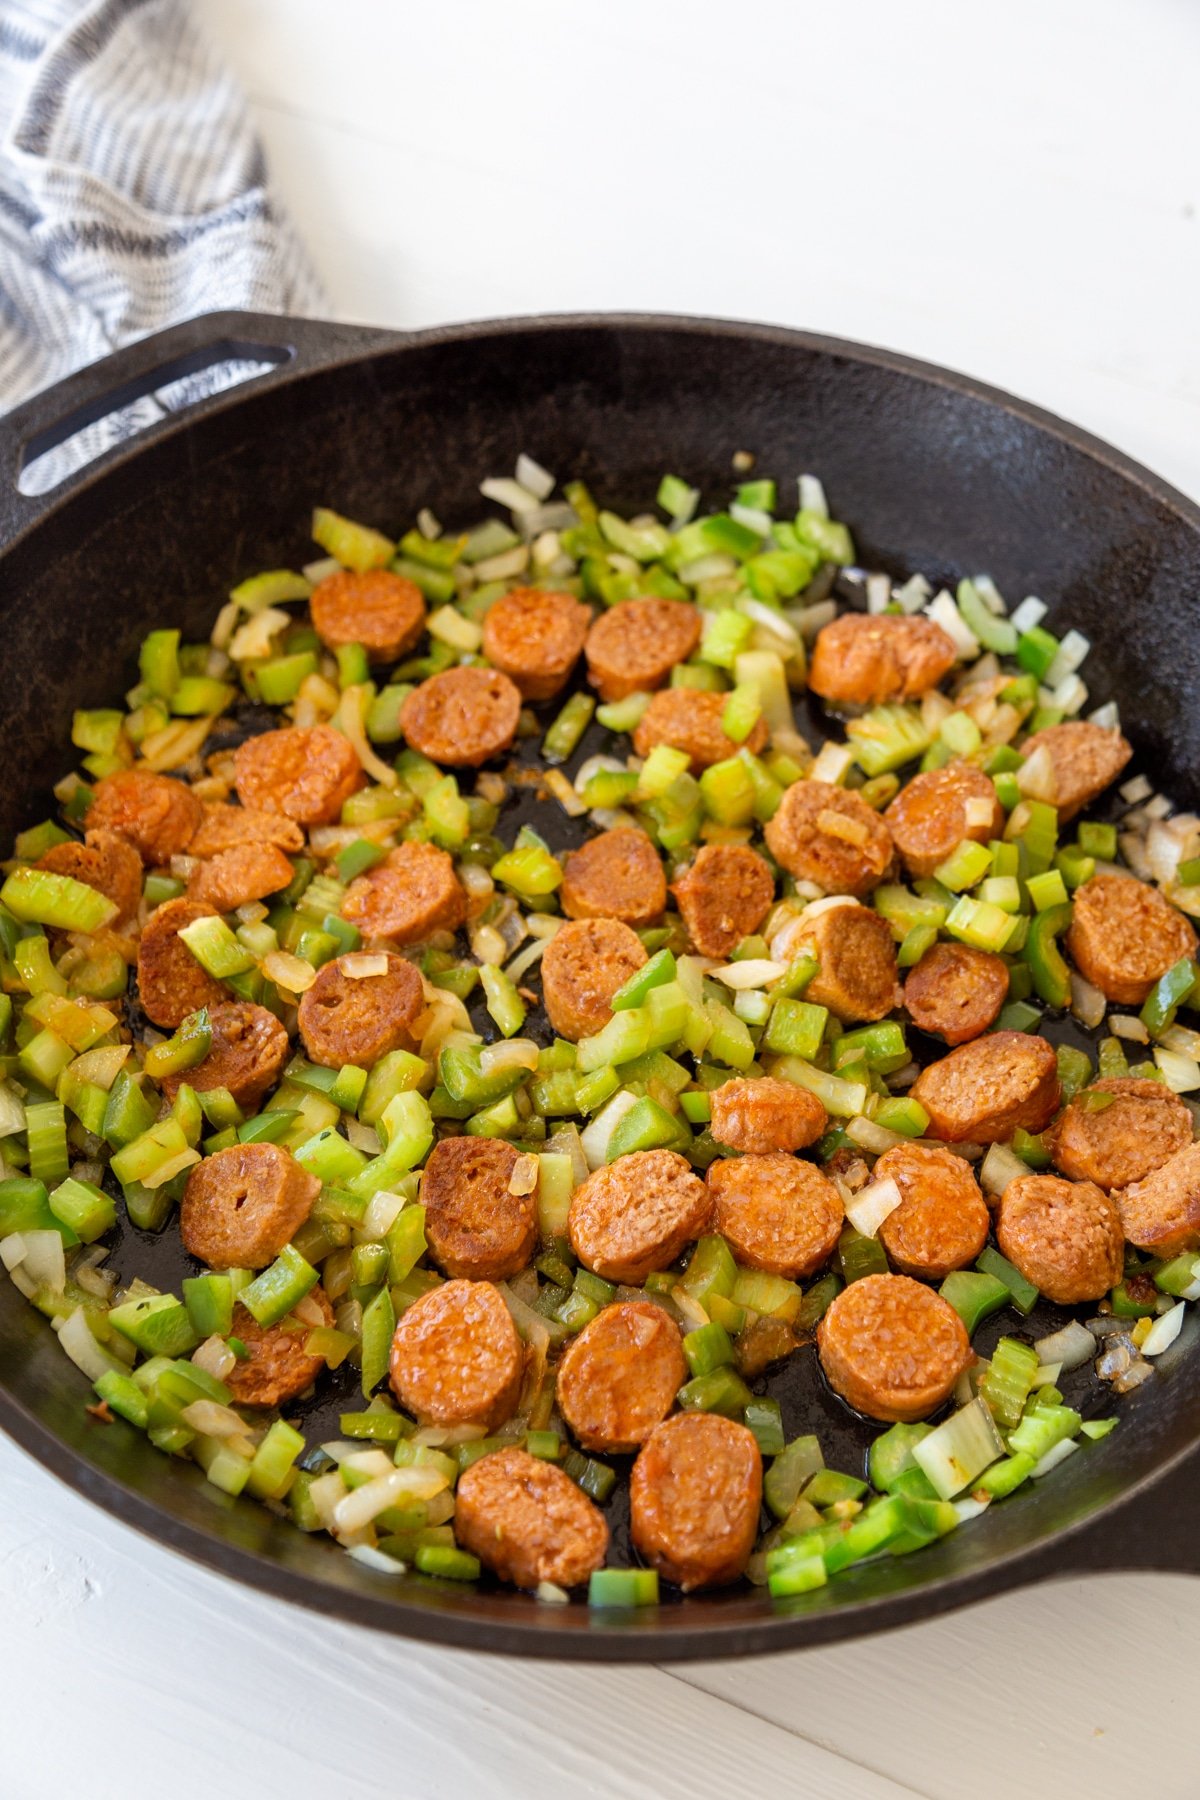 Cooked sliced sausage, onion, green bell pepper, and celery in a black iron skillet with a white and black towel next to the pan.